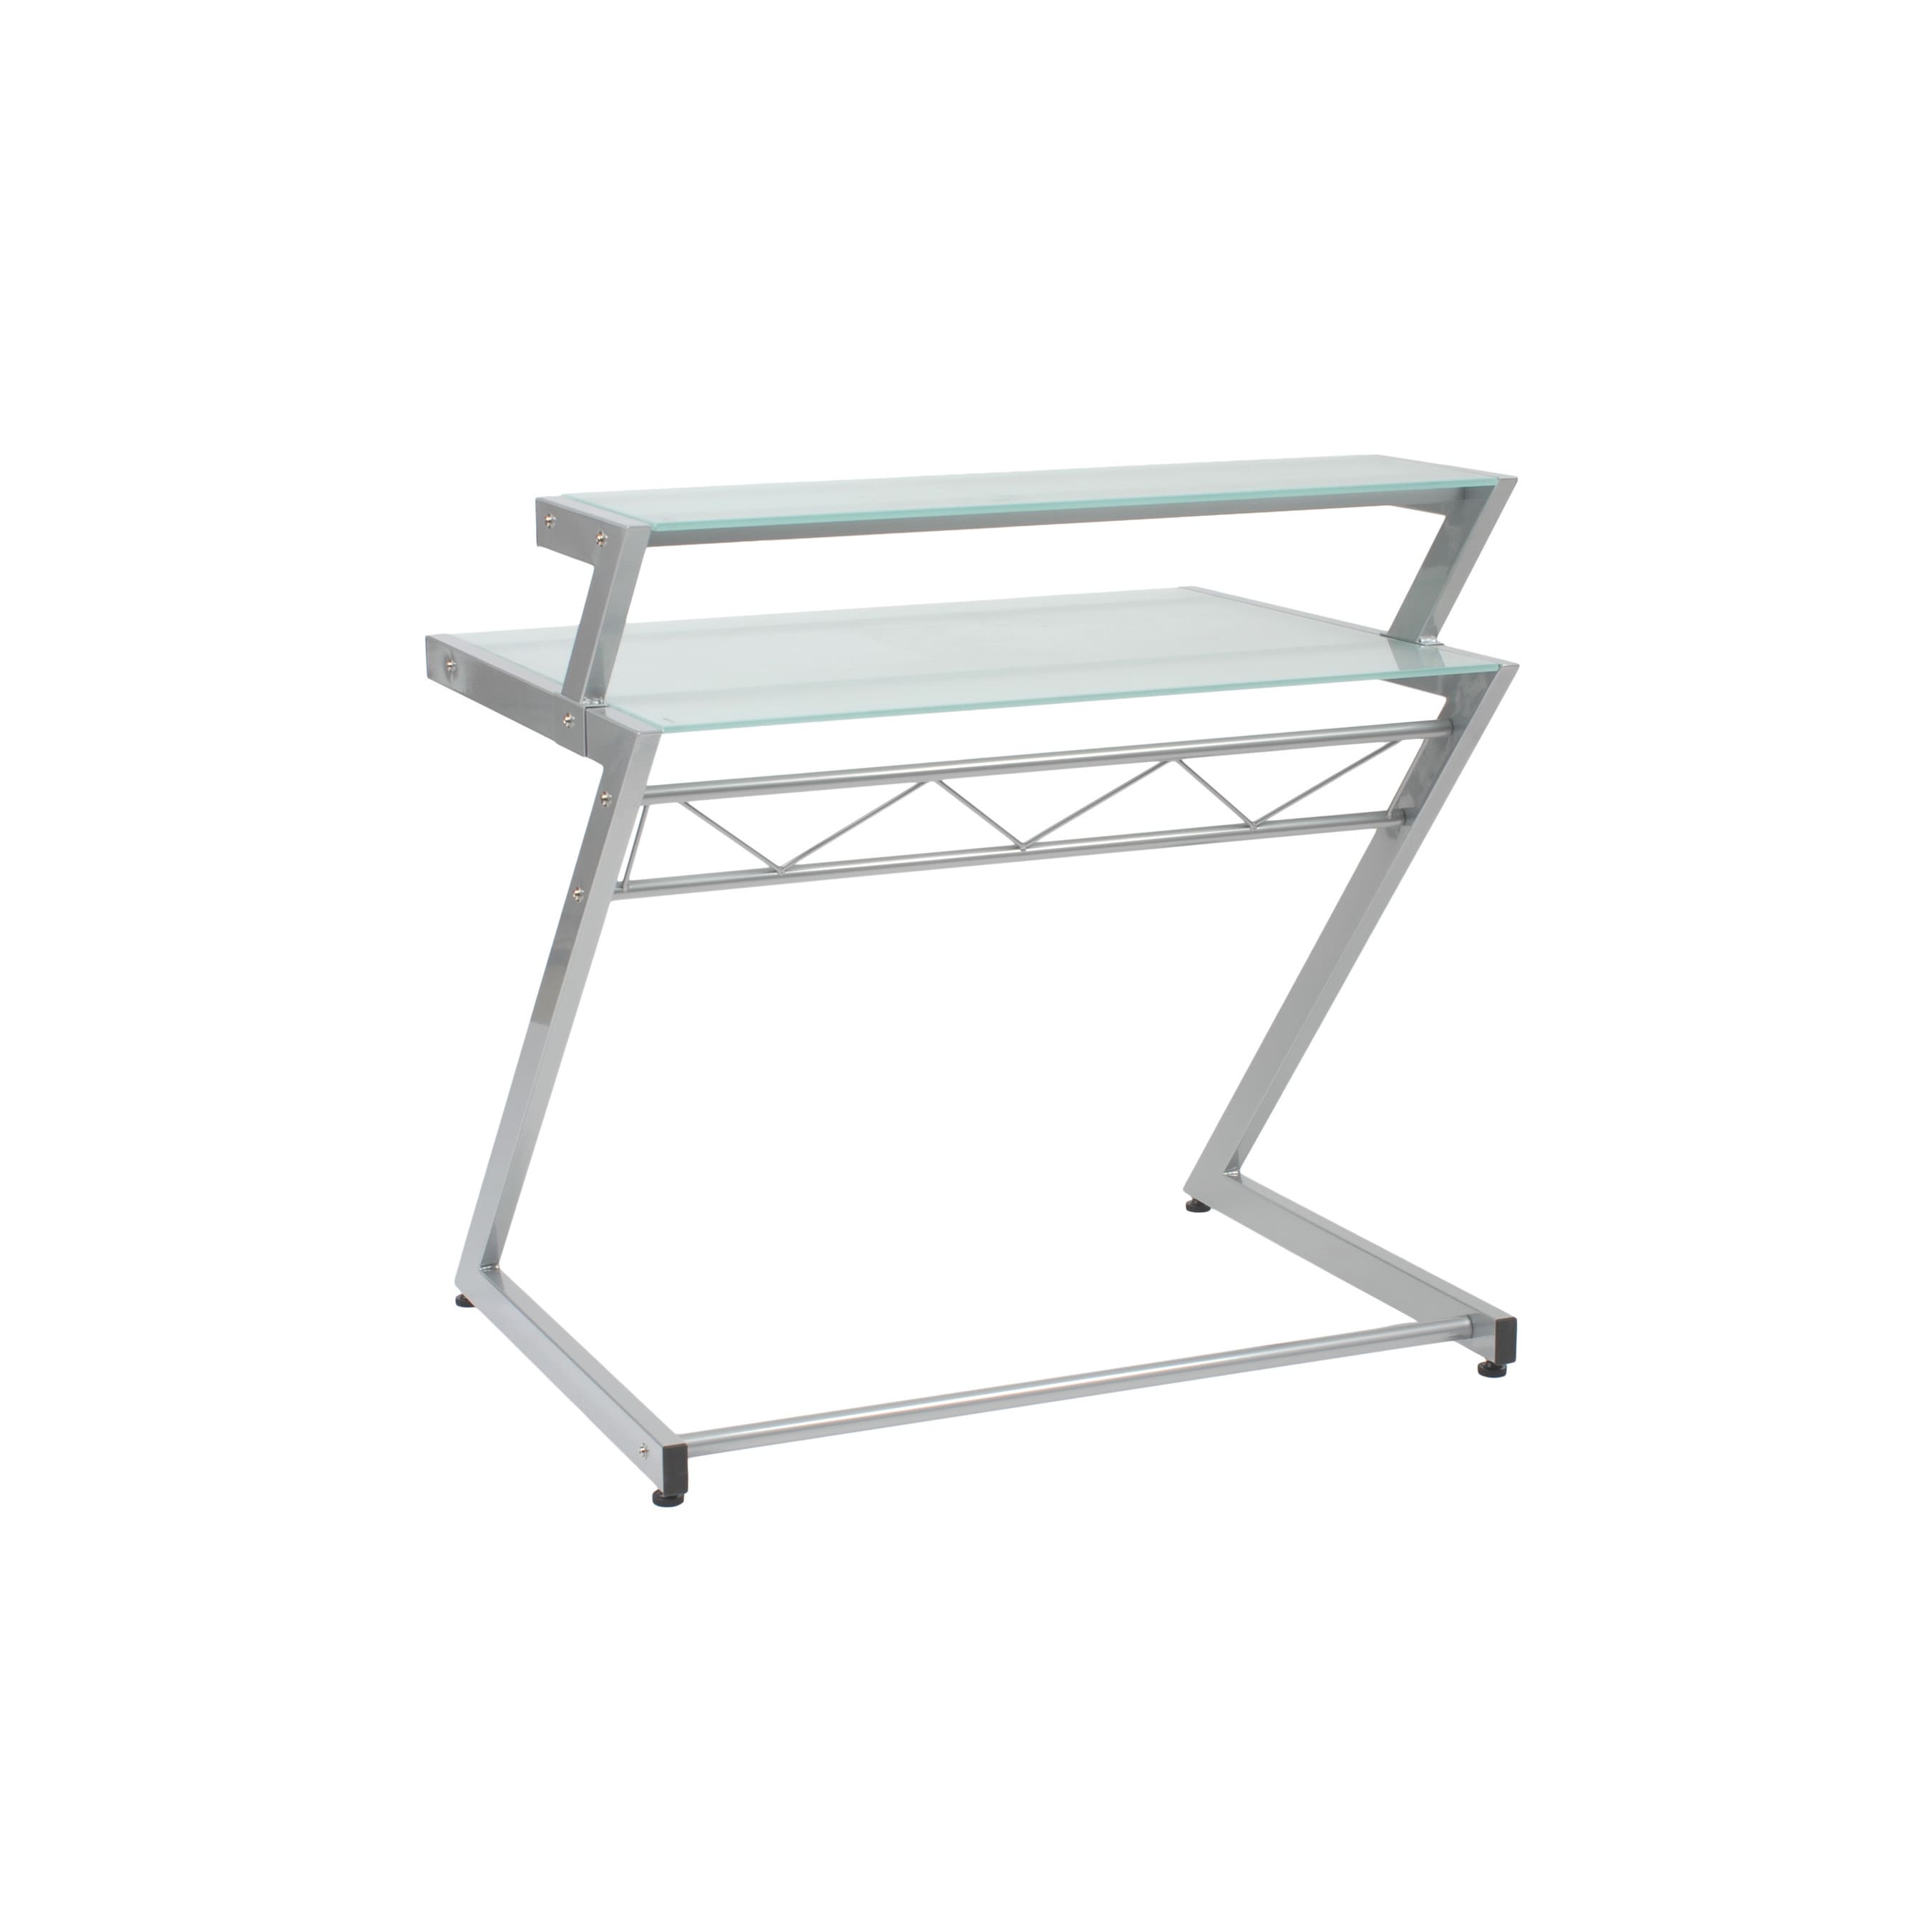 https://ak1.ostkcdn.com/images/products/10995954/Z-Deluxe-Desk-Small-Shelf-Aluminum-Frosted-Glass-224bef9d-af28-43b7-be08-39121c5718e9.jpg